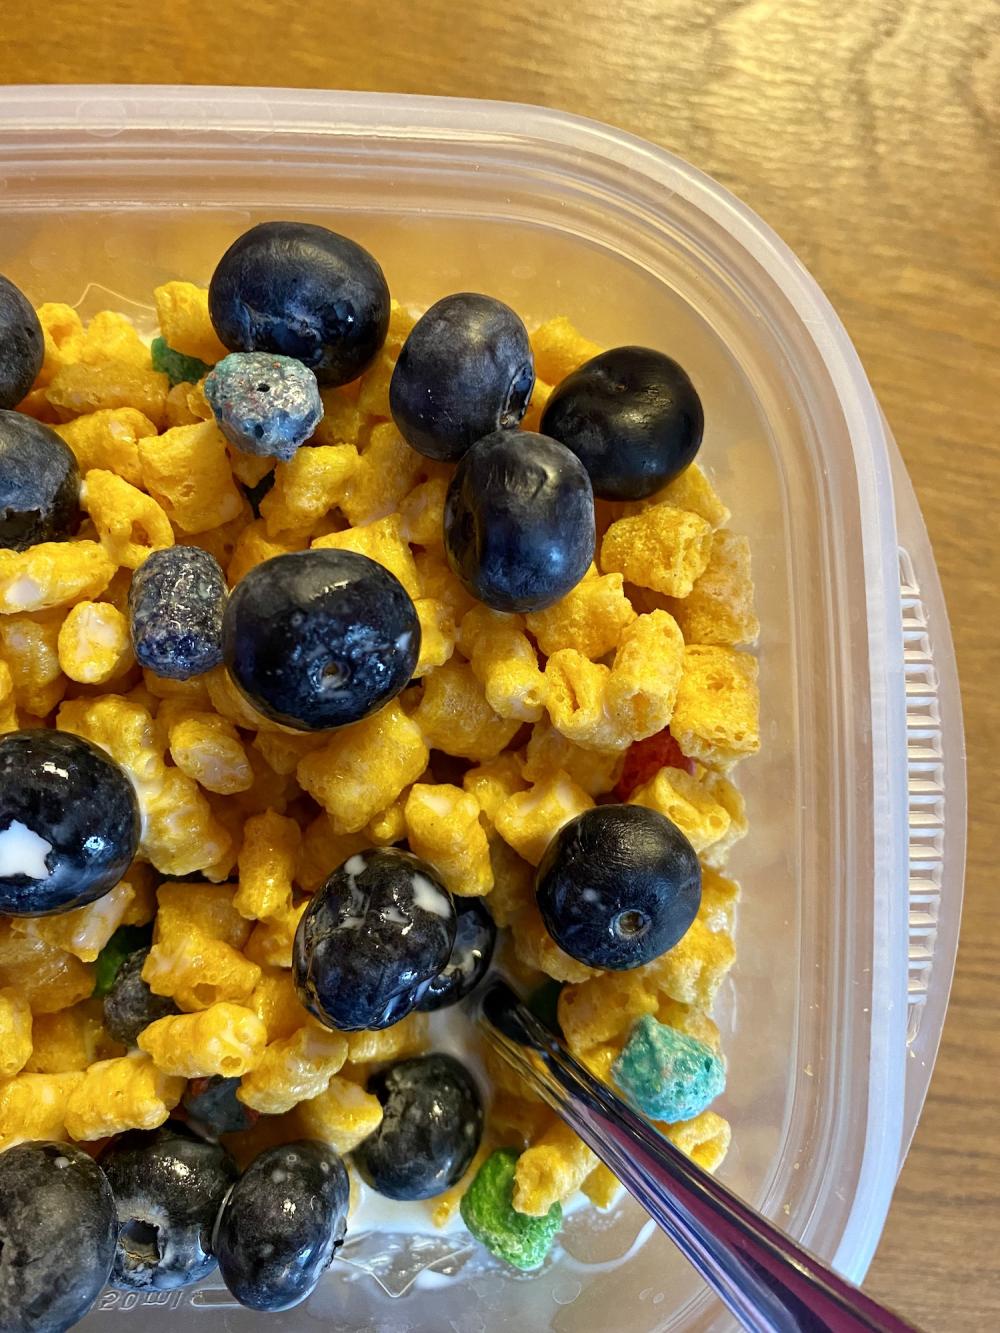 Cap’n Crunch with blueberries